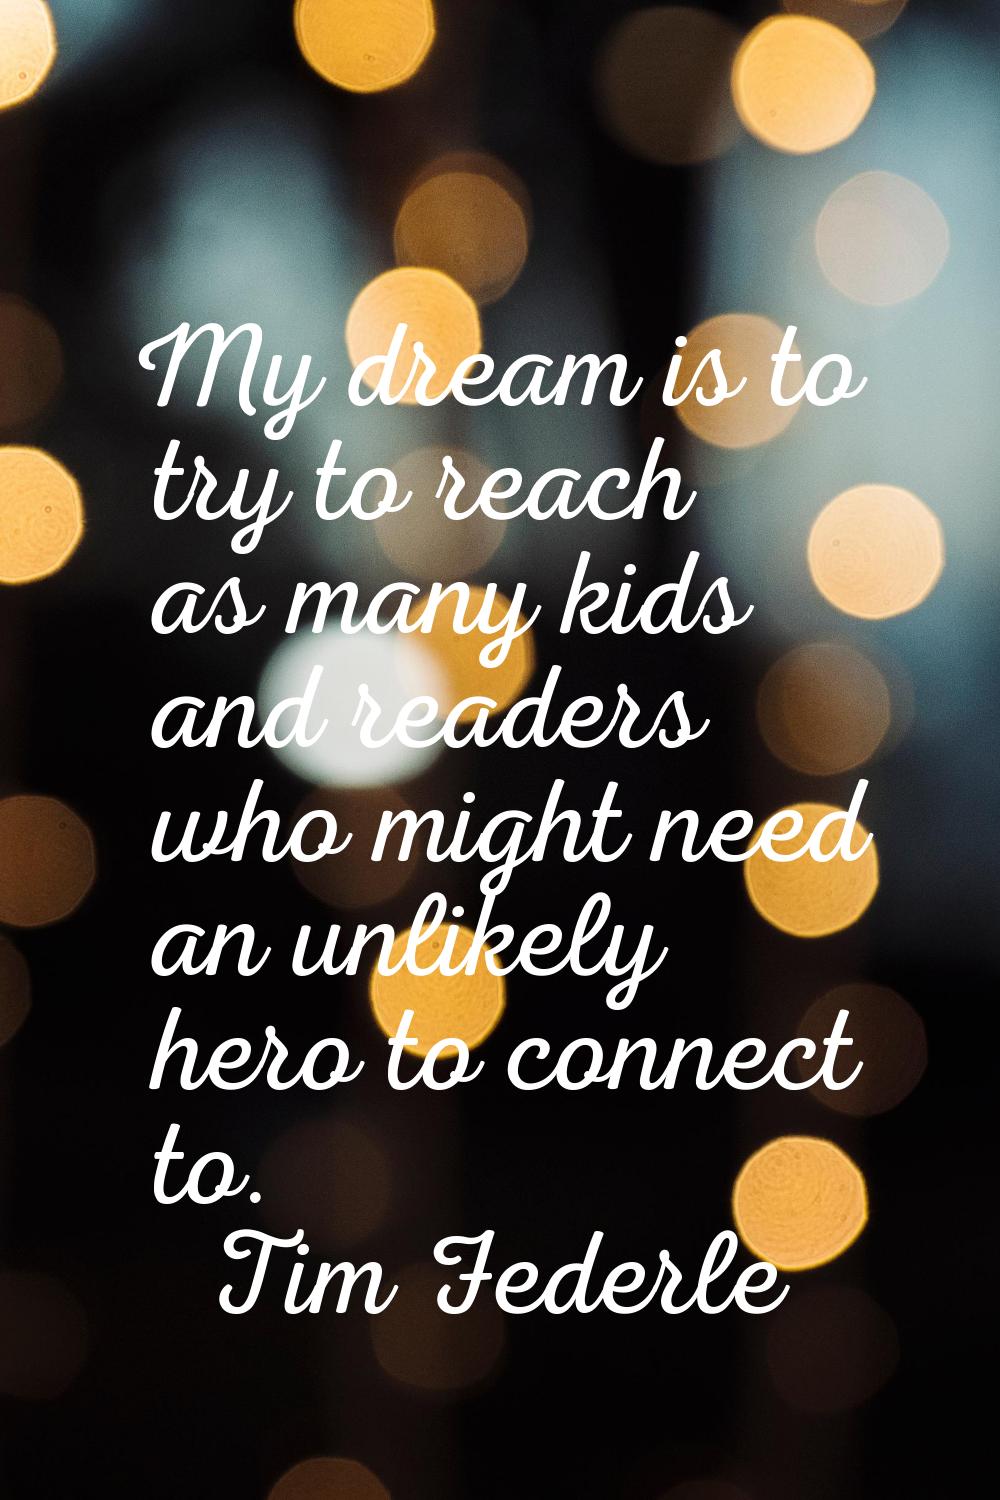 My dream is to try to reach as many kids and readers who might need an unlikely hero to connect to.